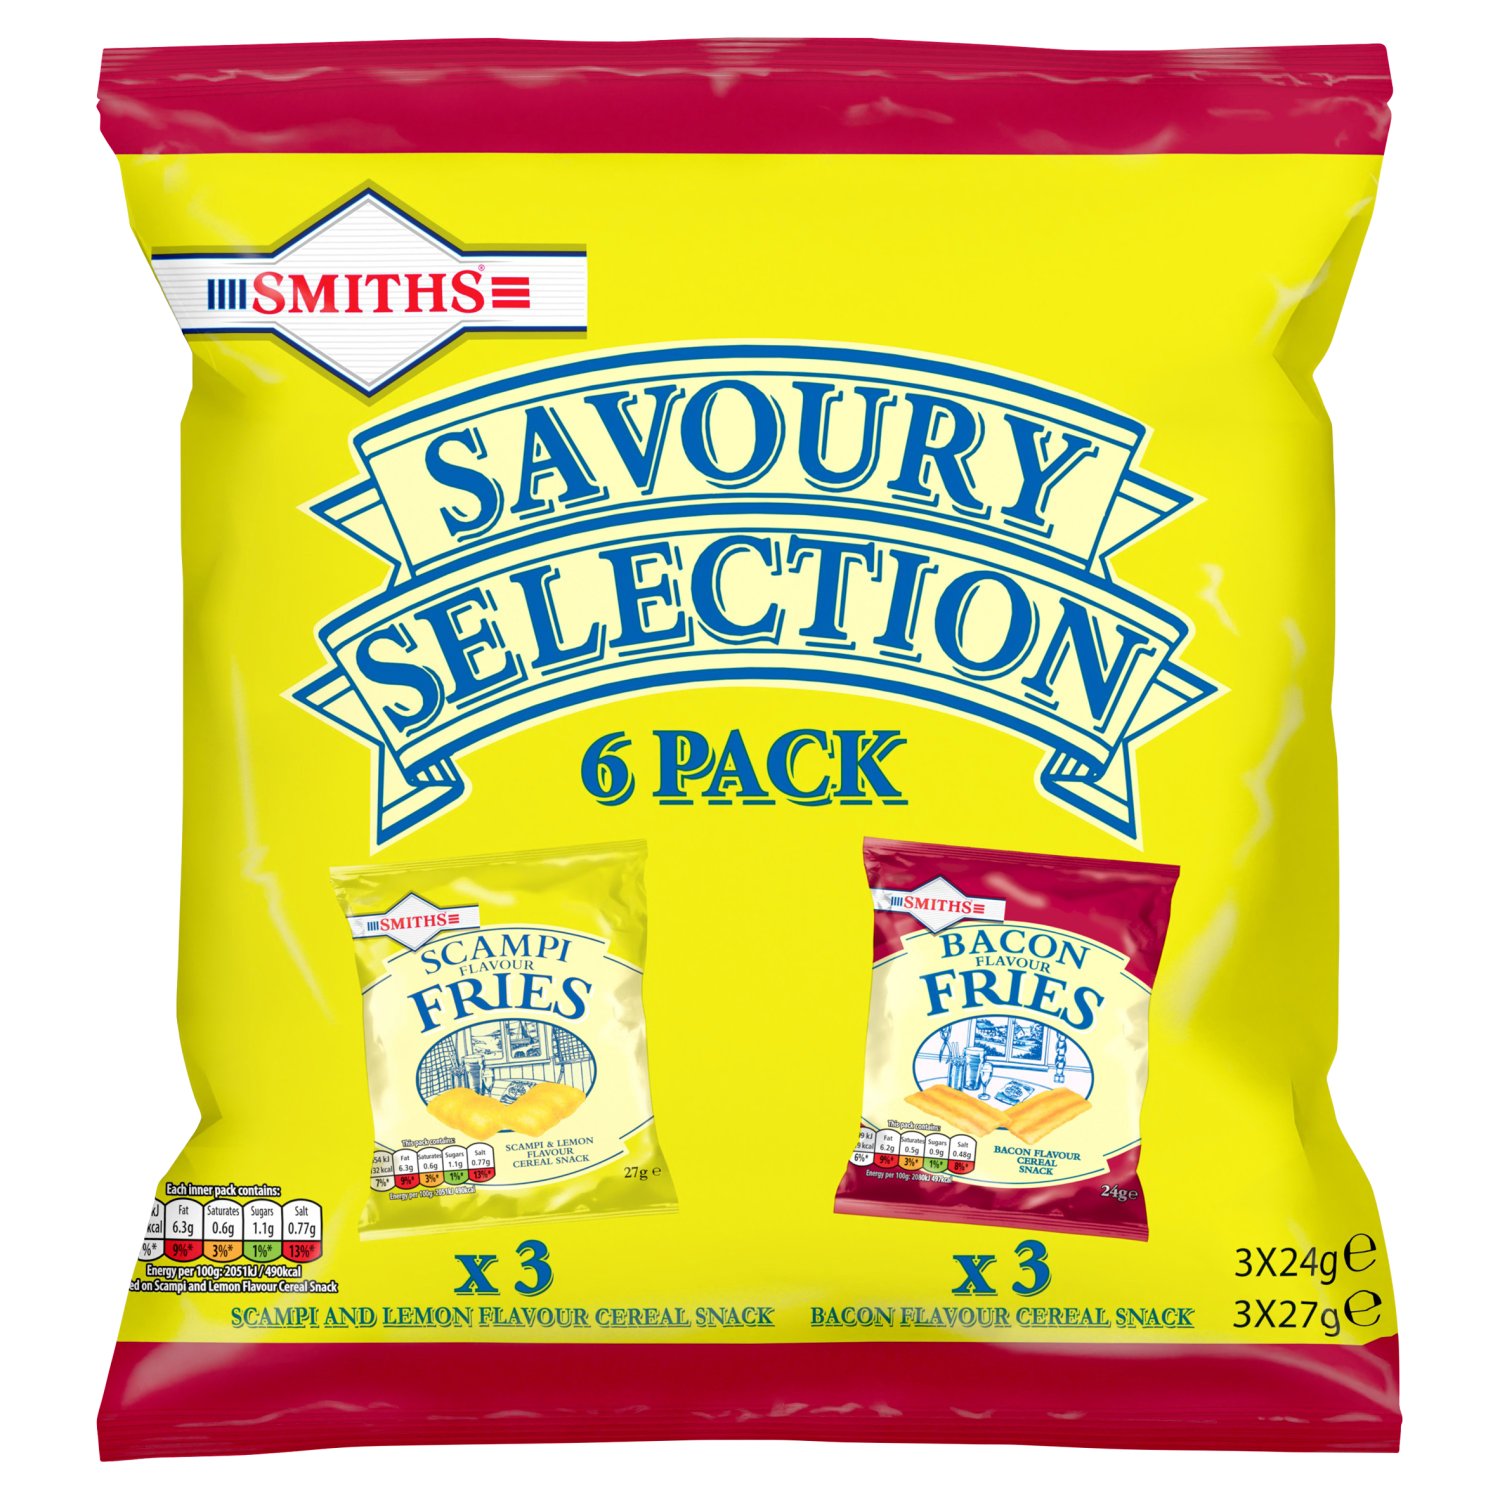 Smiths Savoury Fries Selection 6 Pack (26 g)